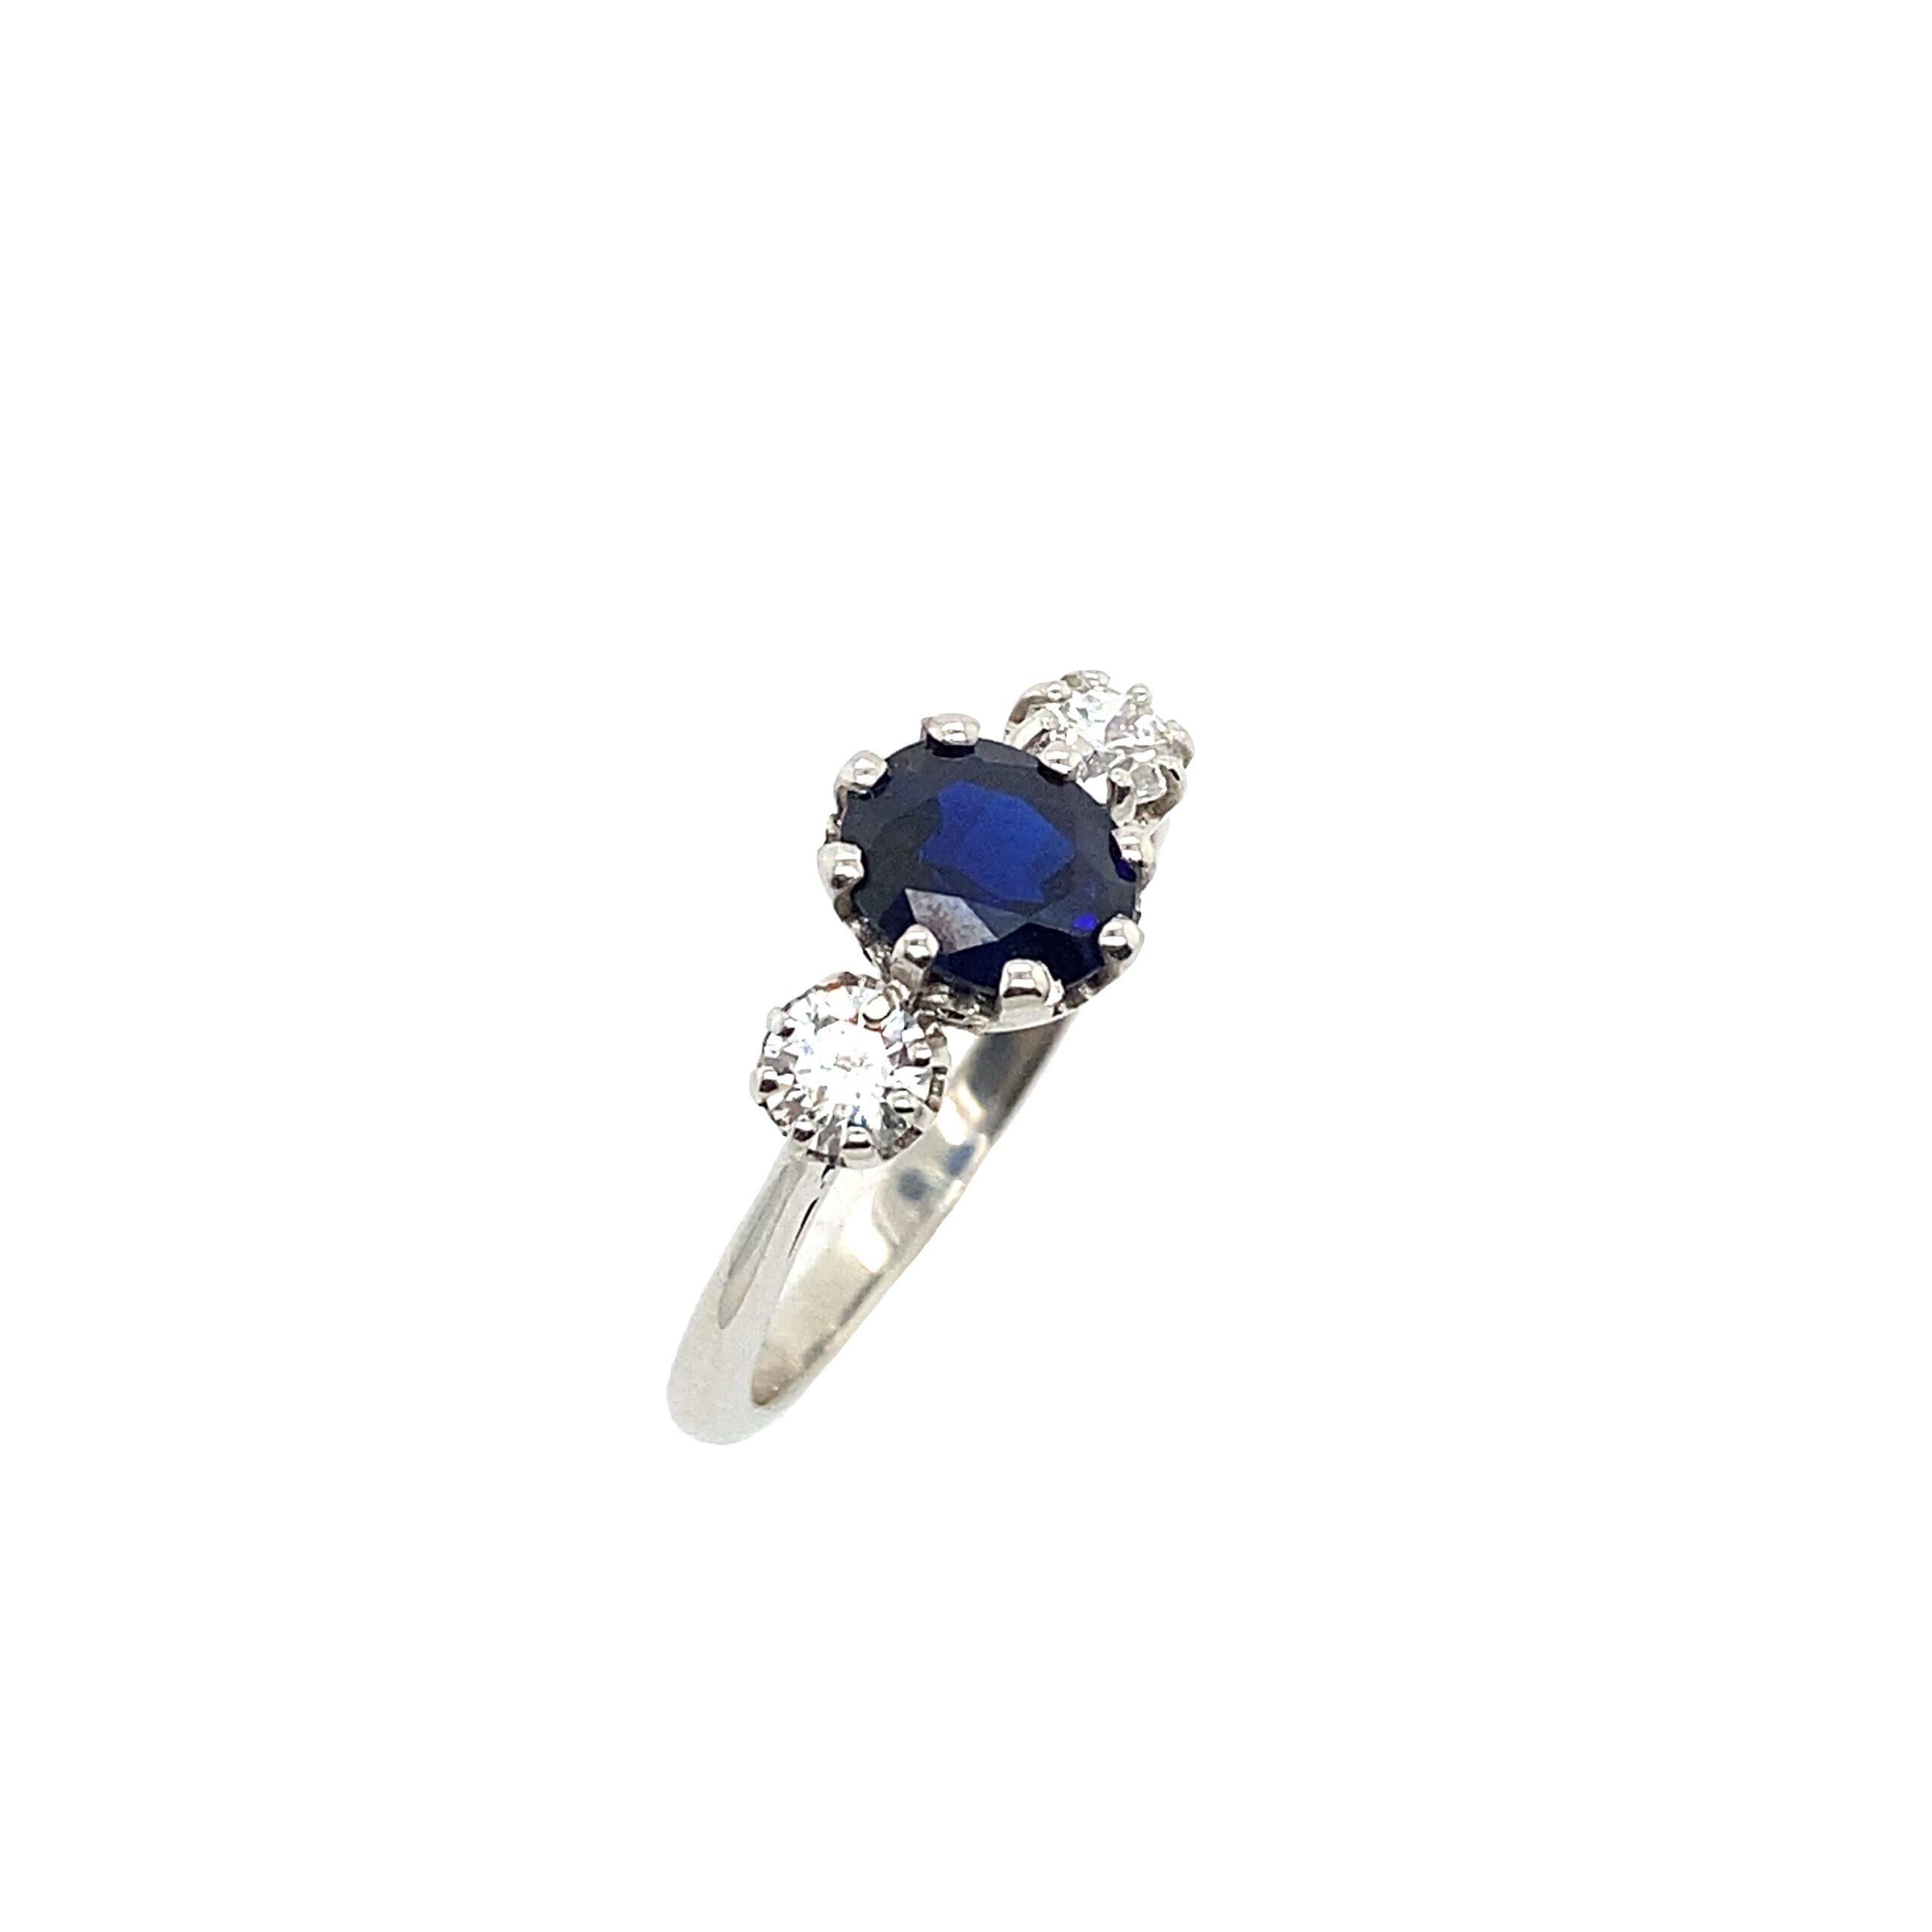 Platinum Trilogy Very Finest Blue 1.19ct Sapphire Ring, with 0.39ct of Diamonds

Additional Information:
Sapphire Weight: 1.19ct
Total Diamond Weight: 0.39ct
Diamond Colour: G
Diamond Clarity: VS
Total Weight: 3.8g
Ring Size: M 1/2